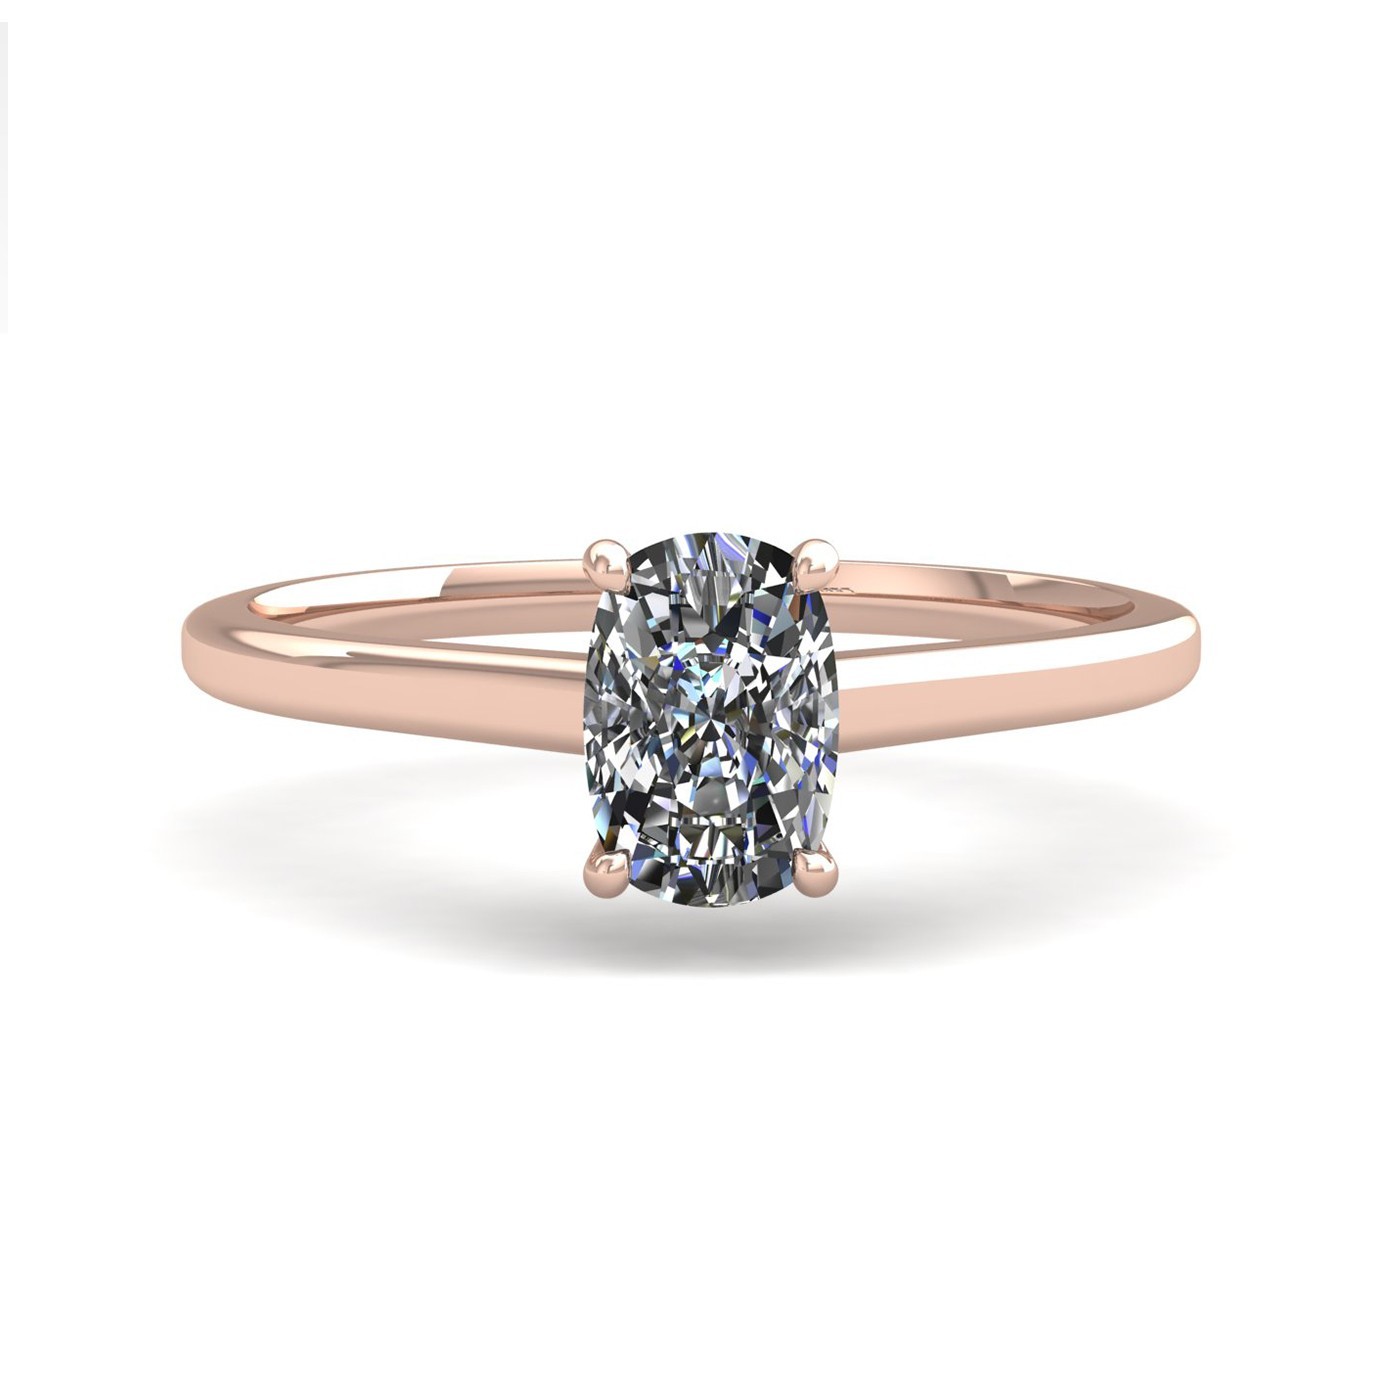 18k rose gold  2.50 ct 4 prongs solitaire elongated cushion cut diamond engagement ring with whisper thin band Photos & images